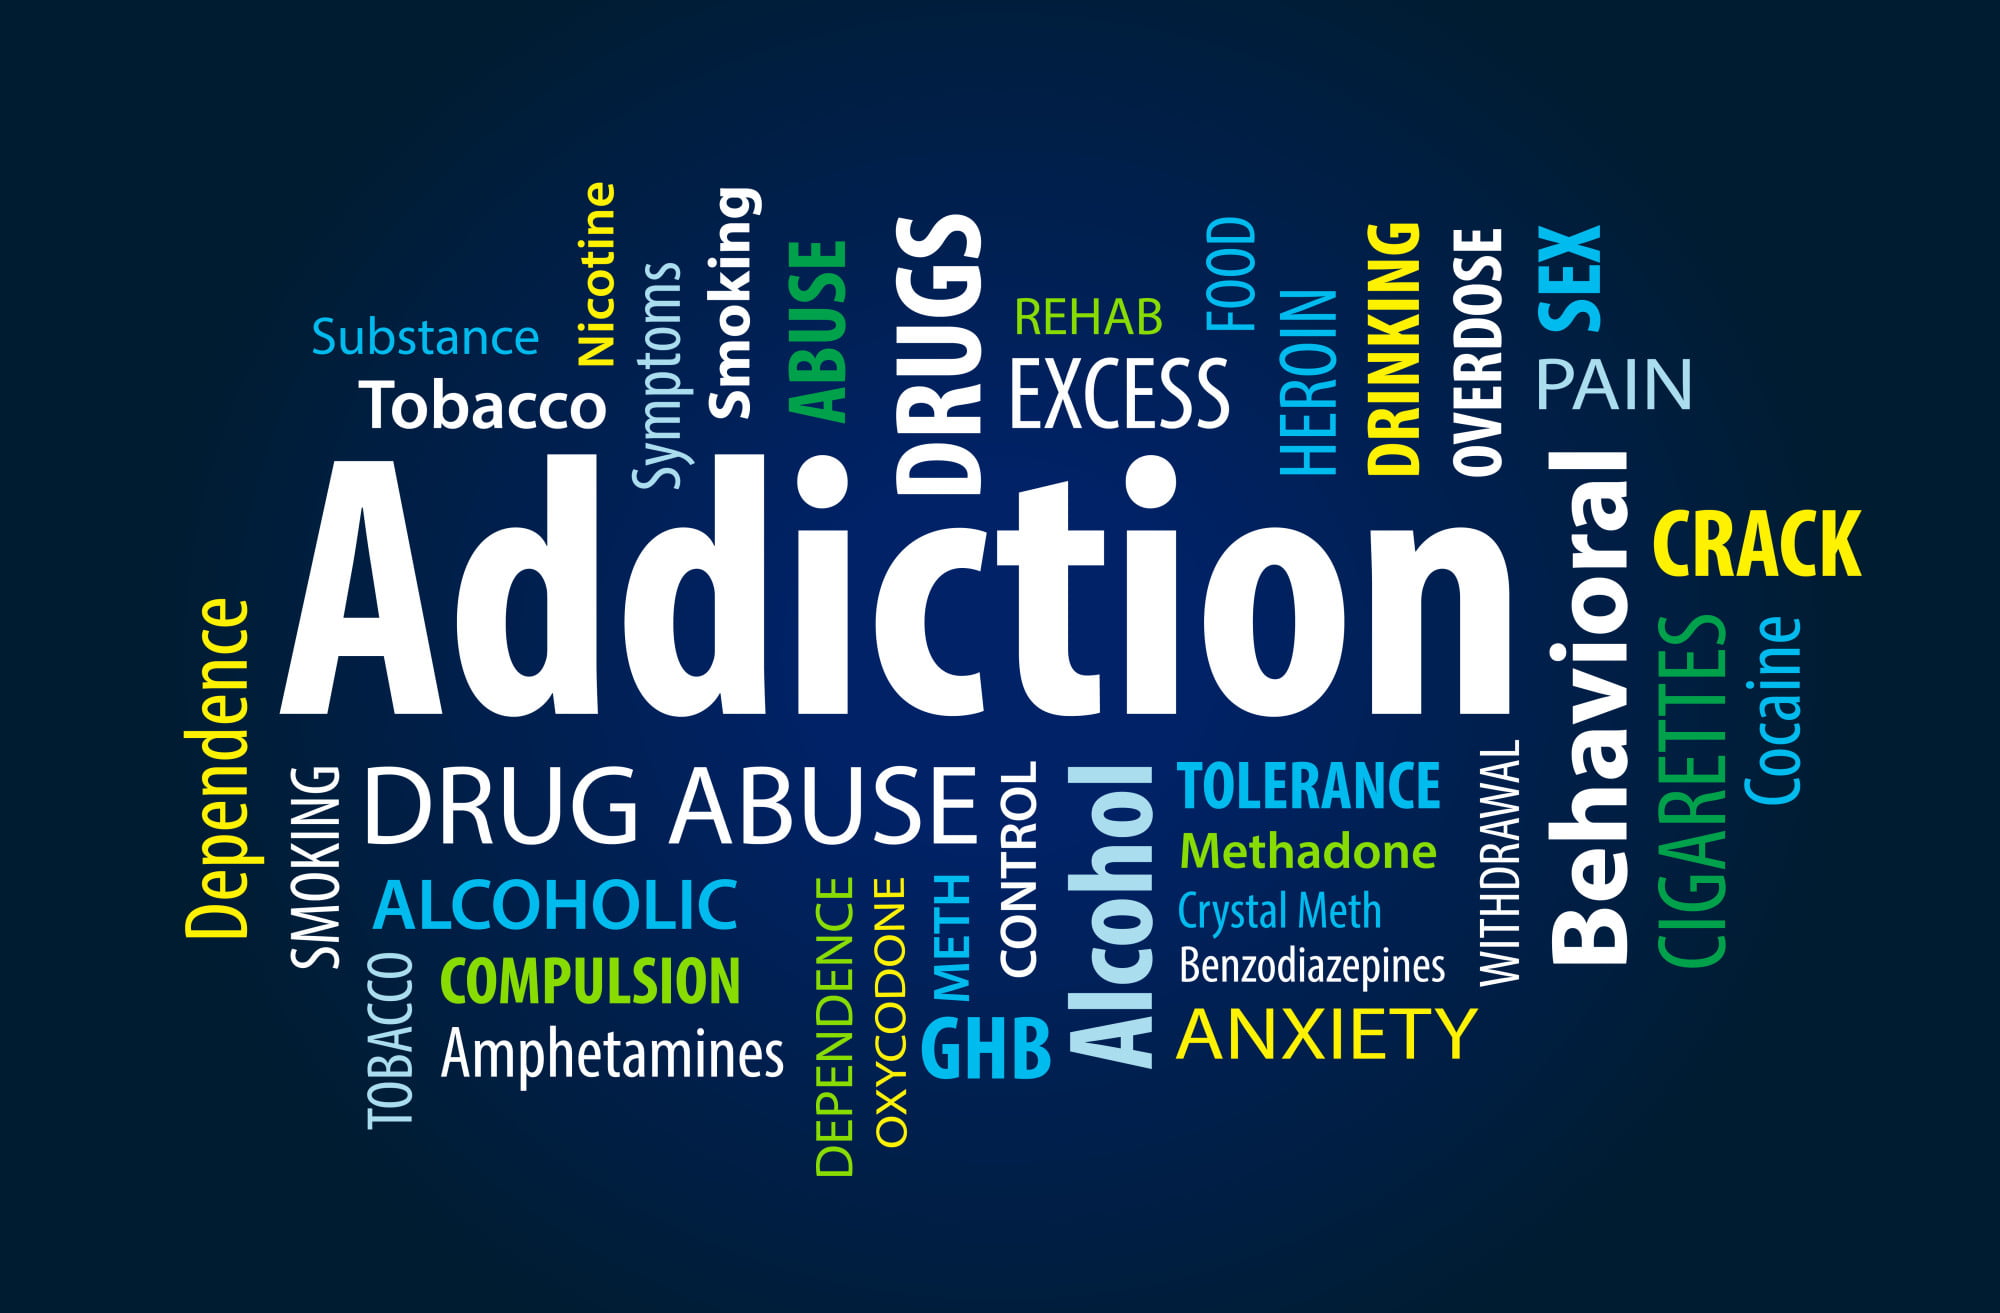 Did you know that not all addictions are diagnosed equally these days? Here are the many different types of addictions that exist today.